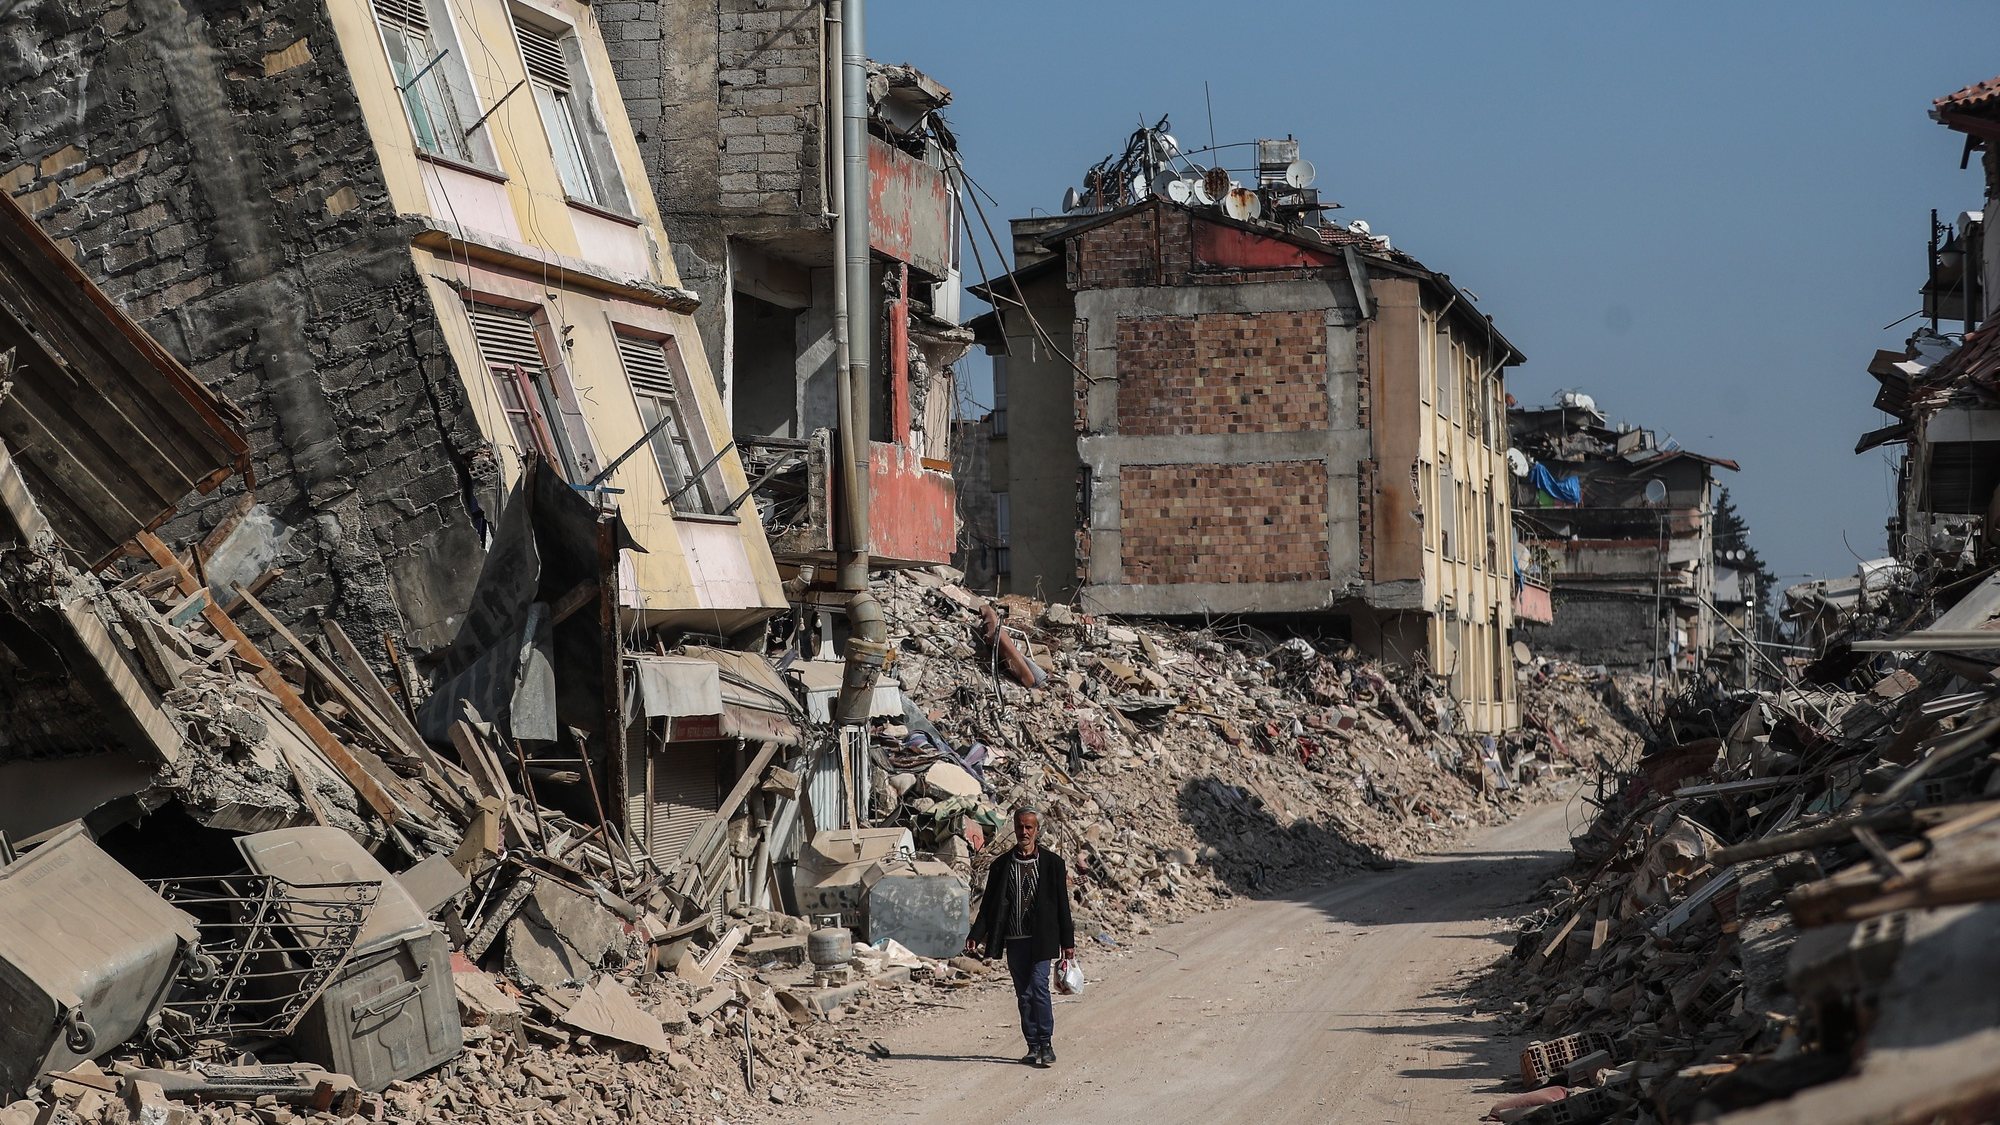 epa10485023 A man walks past collapsed buildings in the aftermath of powerful earthquakes in Hatay, Turkey, 23 February 2023. More than 46,000 people died and thousands more were injured after major earthquakes struck southern Turkey and northern Syria on 06 February and again on 20 February.  EPA/ERDEM SAHIN